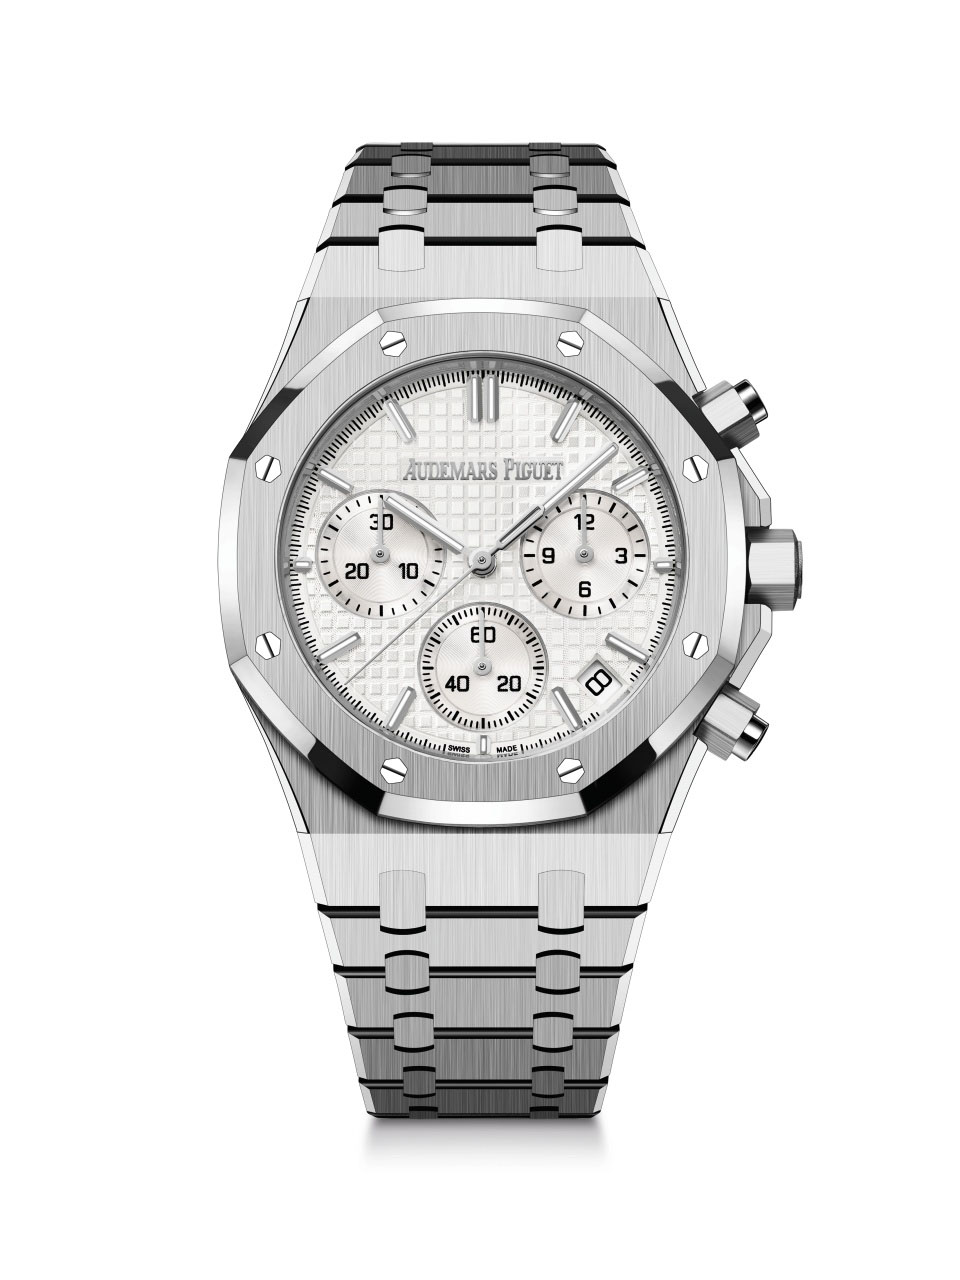 Royal Oak Selfwinding Chronograph / 41mm; stainless steel case with silver-toned dial (26240ST.OO.1320ST.03)